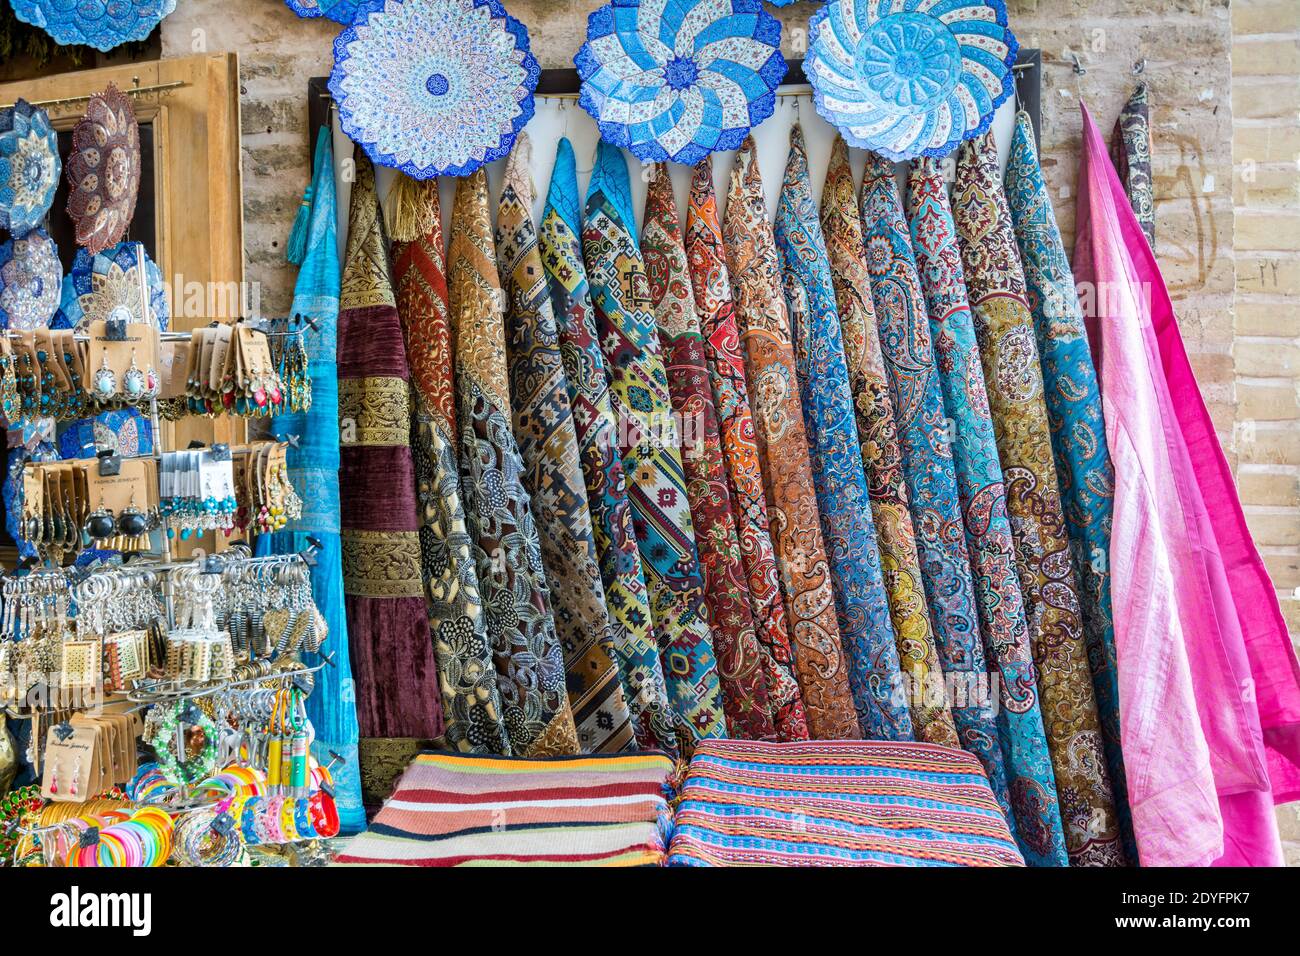 Persian carpet shops in the historic buildings,  situated on the west side of  Naqsh-e Jahan Square, one of UNESCO's World Heritage Sites Stock Photo